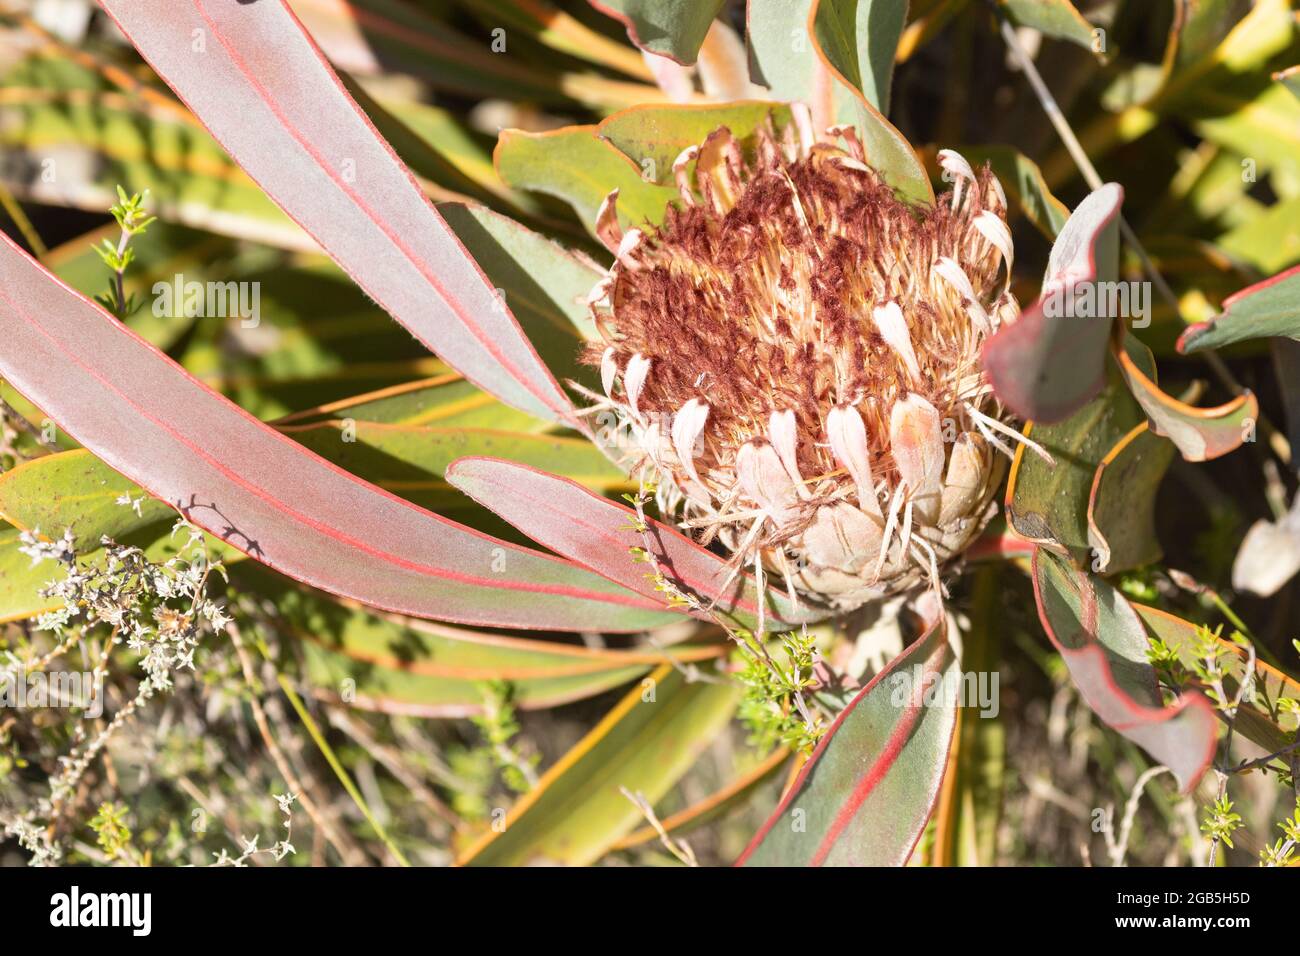 Protea caespitosa (Hottentots Holland variant) near McGregor, Western Cape, South Africa, a mountain Fynbos species of plant. Stock Photo